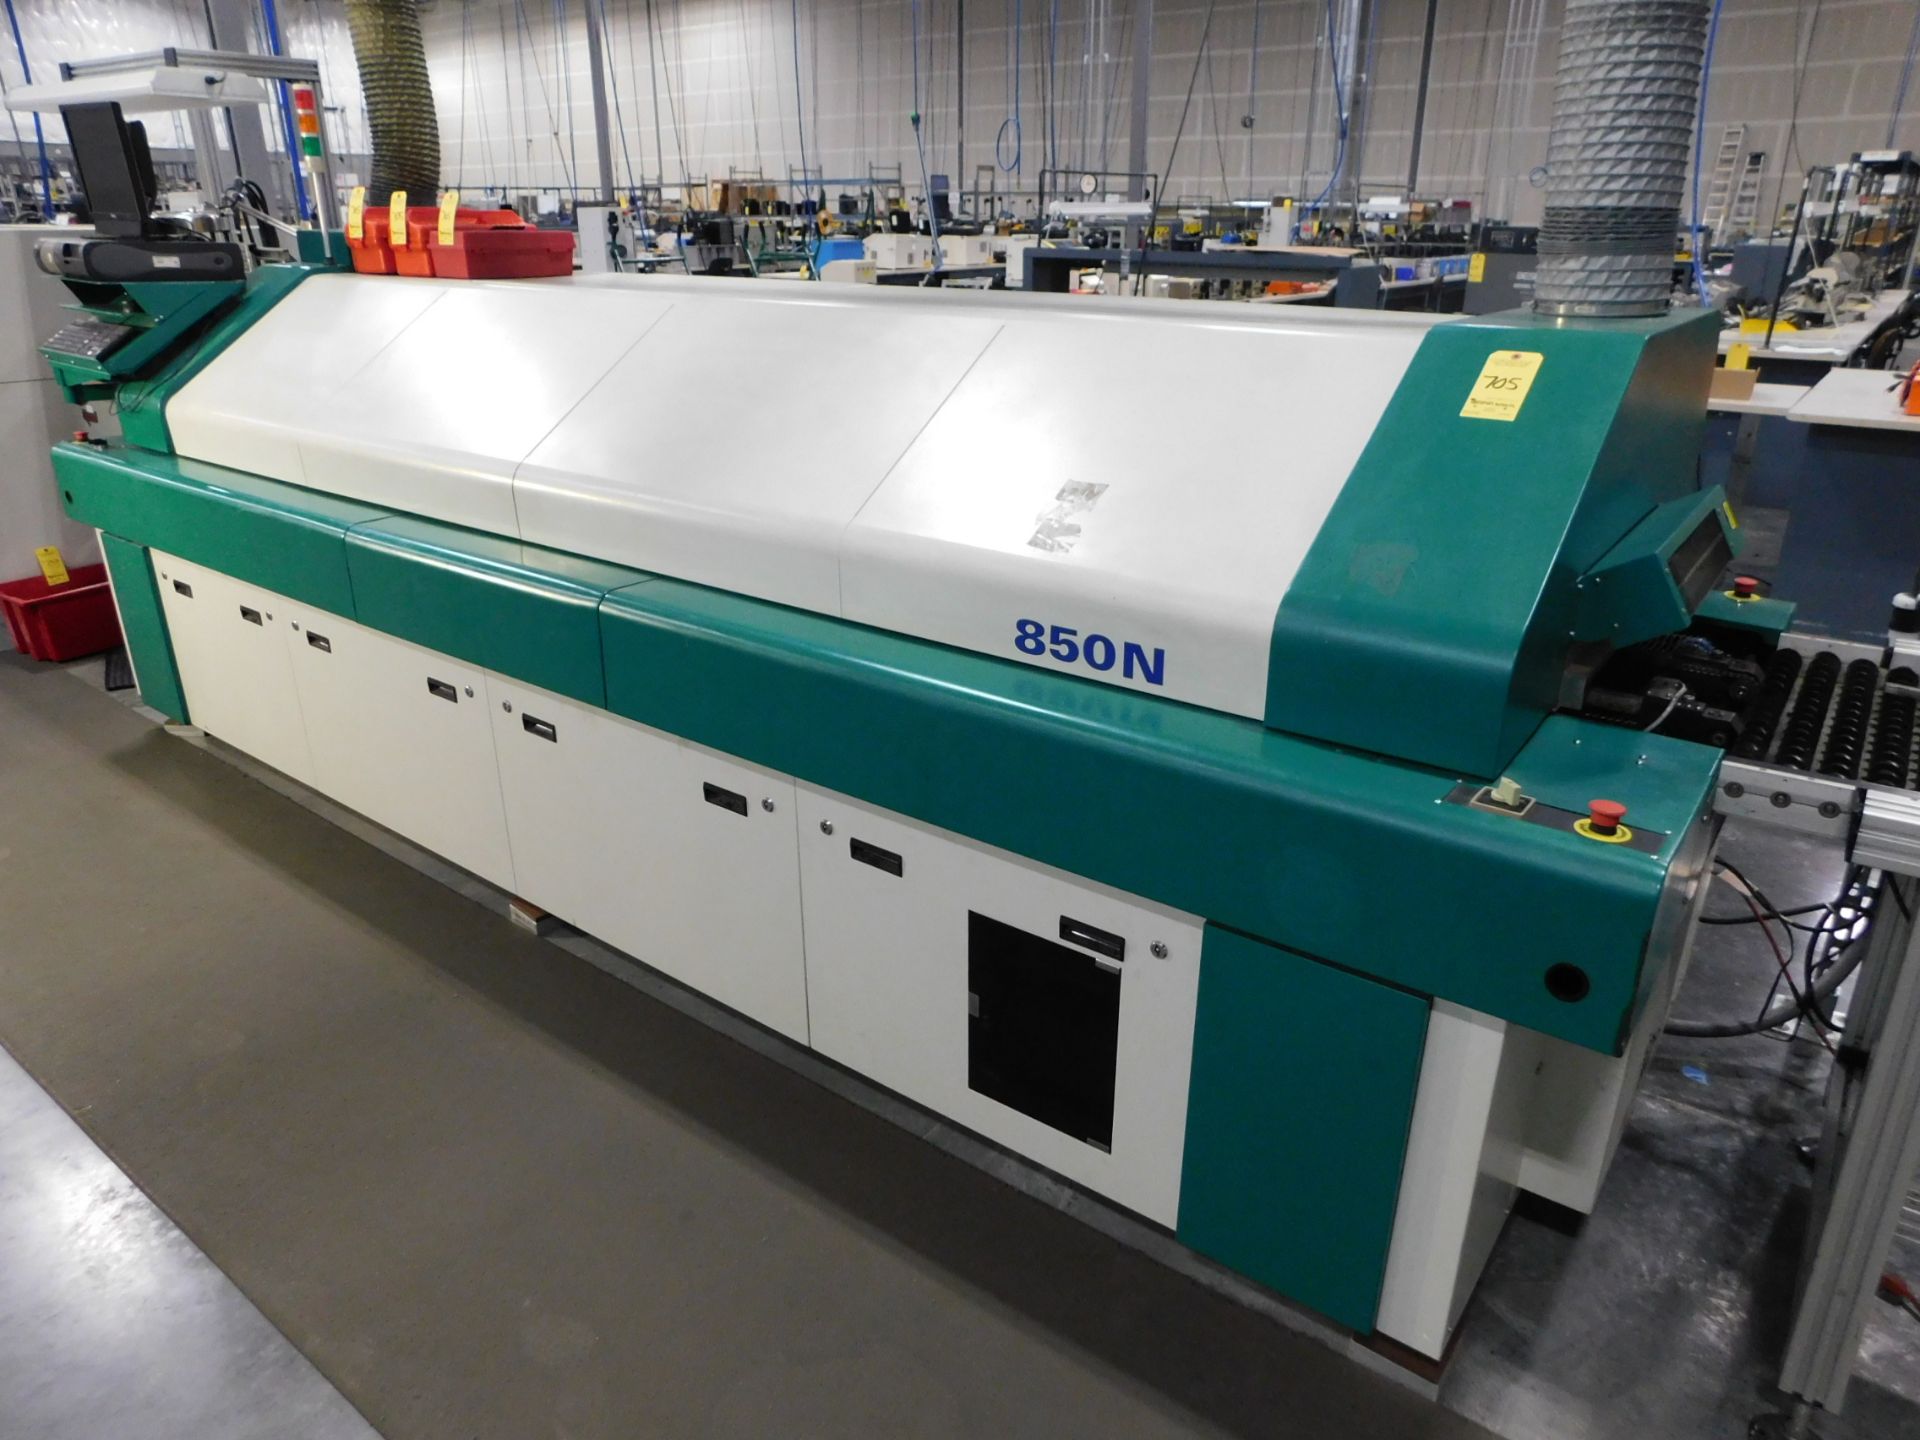 Science Scope (Folungwin) Surface Mount Re Flow Oven, Model NW-850N, s/n 1090, 8 Zones, Designed